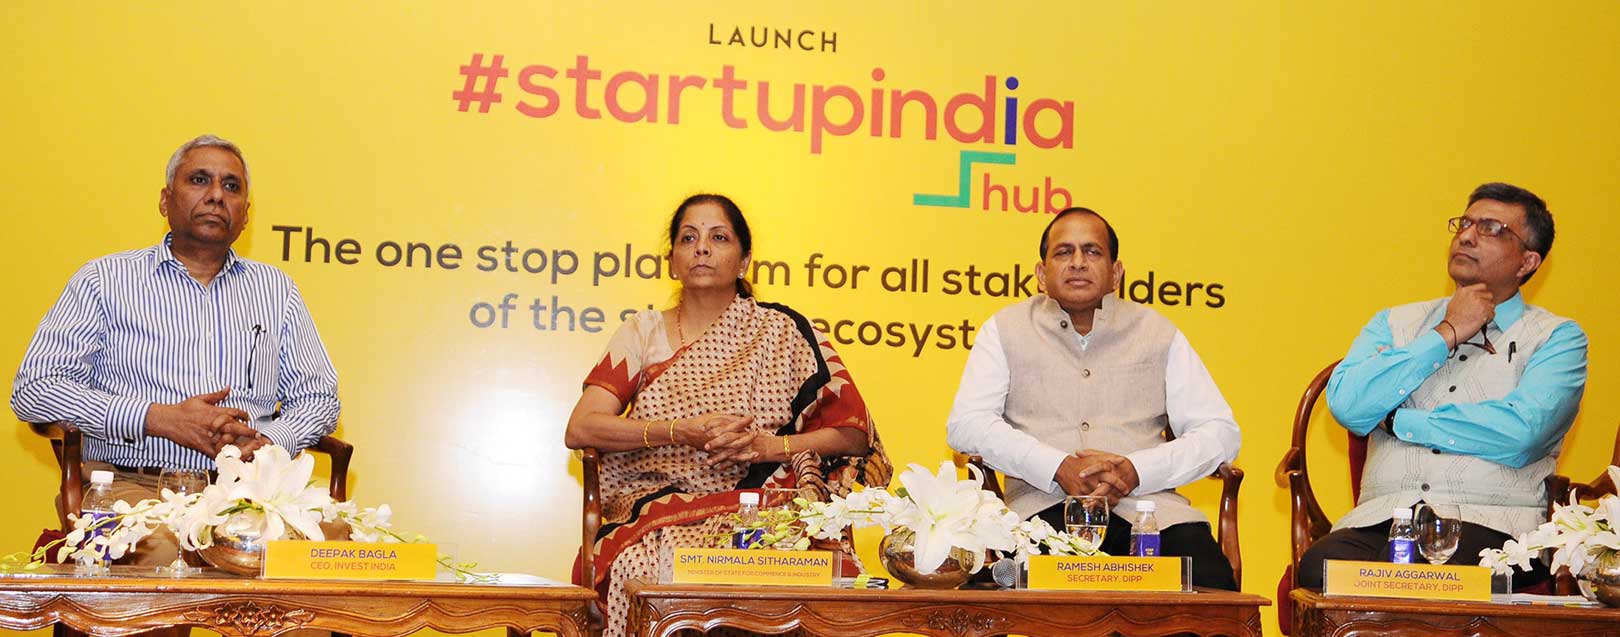 Startup India hub launched by Sitharaman, promises Startup exchange prog among SAARC countries